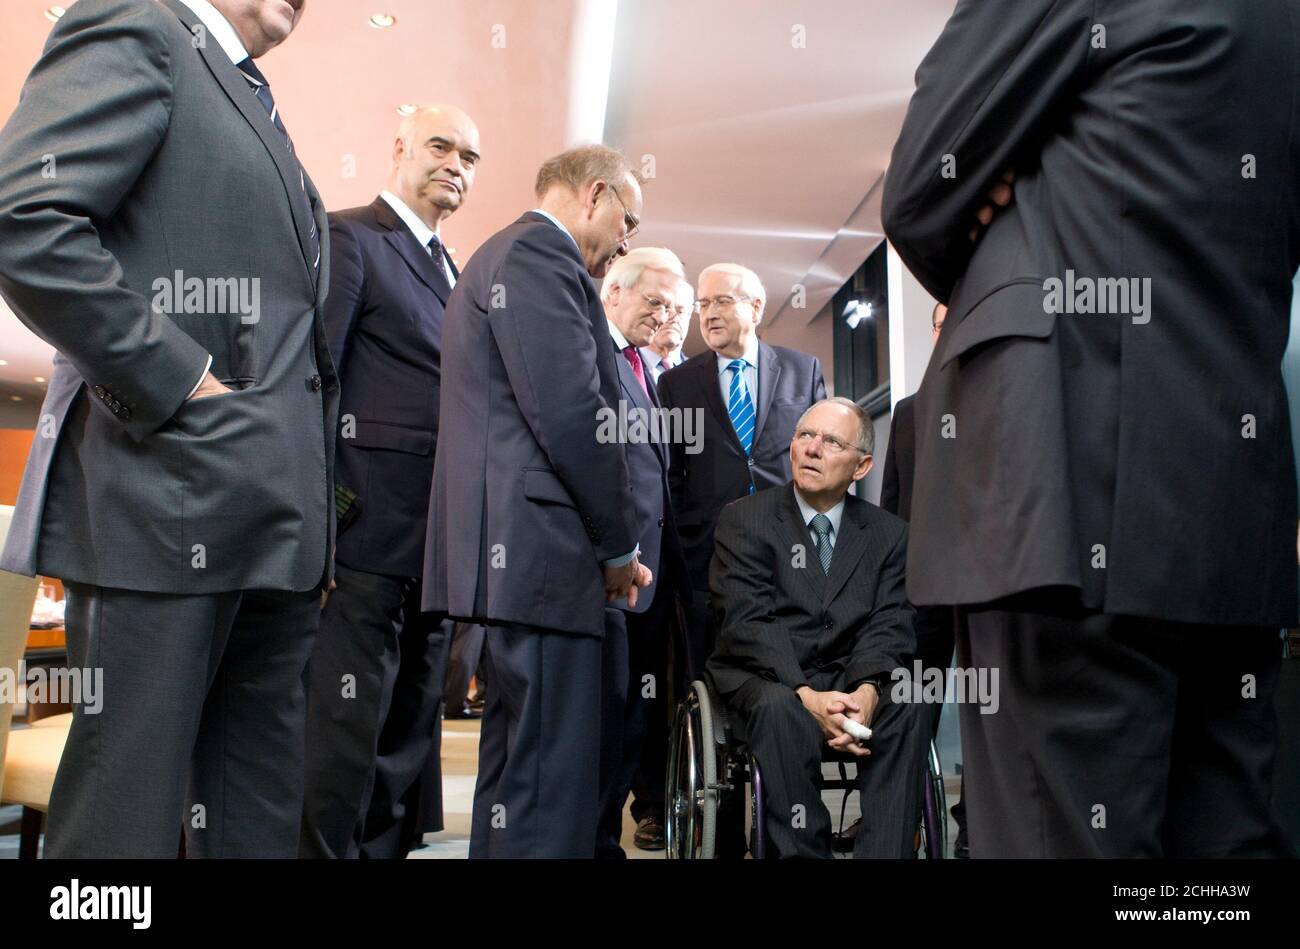 German Wolfgang Schaeuble (2nd L) arrives for a meeting with leaders of the labour unions and the banking and industry sector on the economic situation at the chancellery in Berlin, December 2, 2009.   REUTERS/Thomas Peter (GERMANY - Tags: POLITICS BUSINESS IMAGES OF THE DAY EMPLOYMENT) Stock Photo